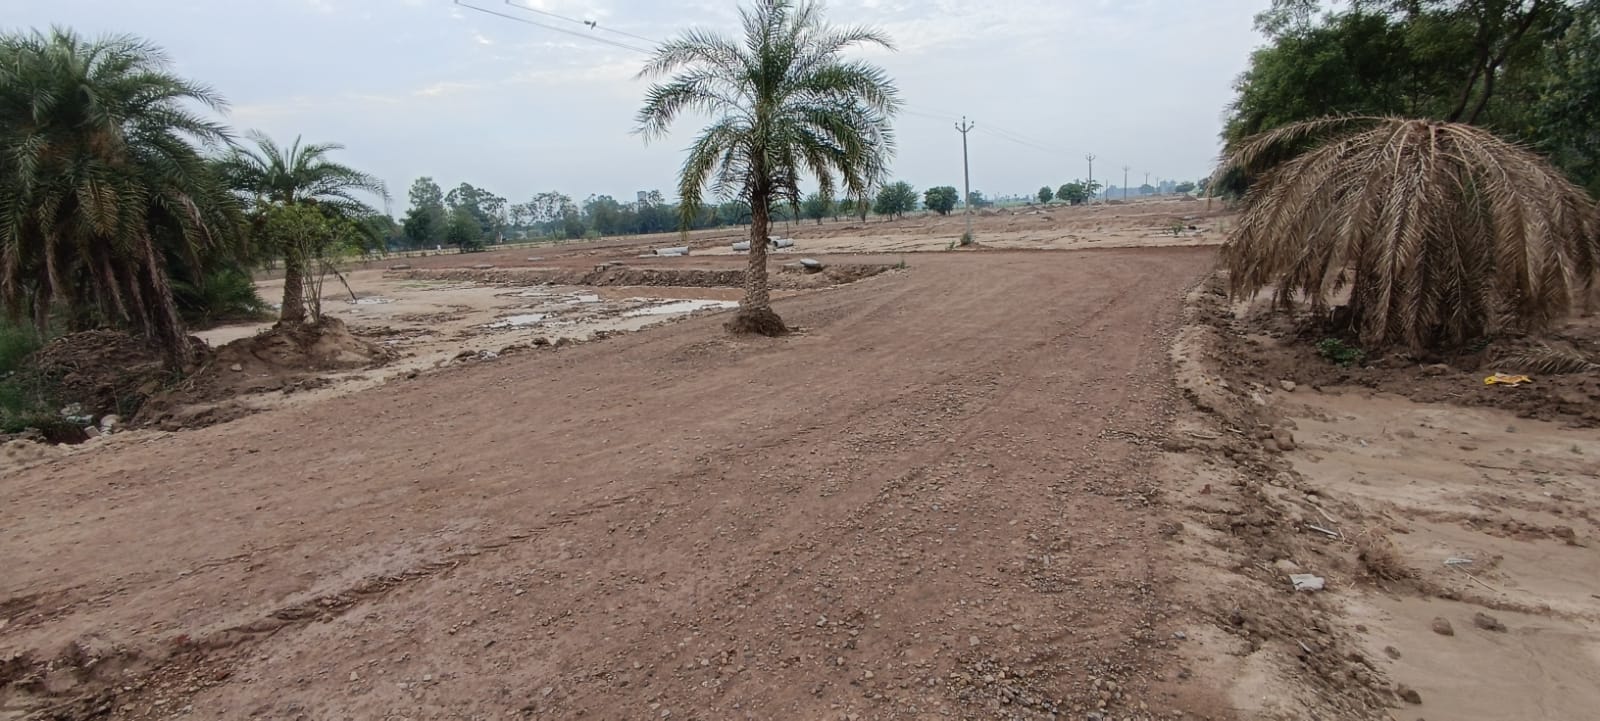 Countryside Greens || Plots in Ludhiana-Chandigarh highway || 9646-650-650Real EstateLand Plot For SaleAll Indiaother